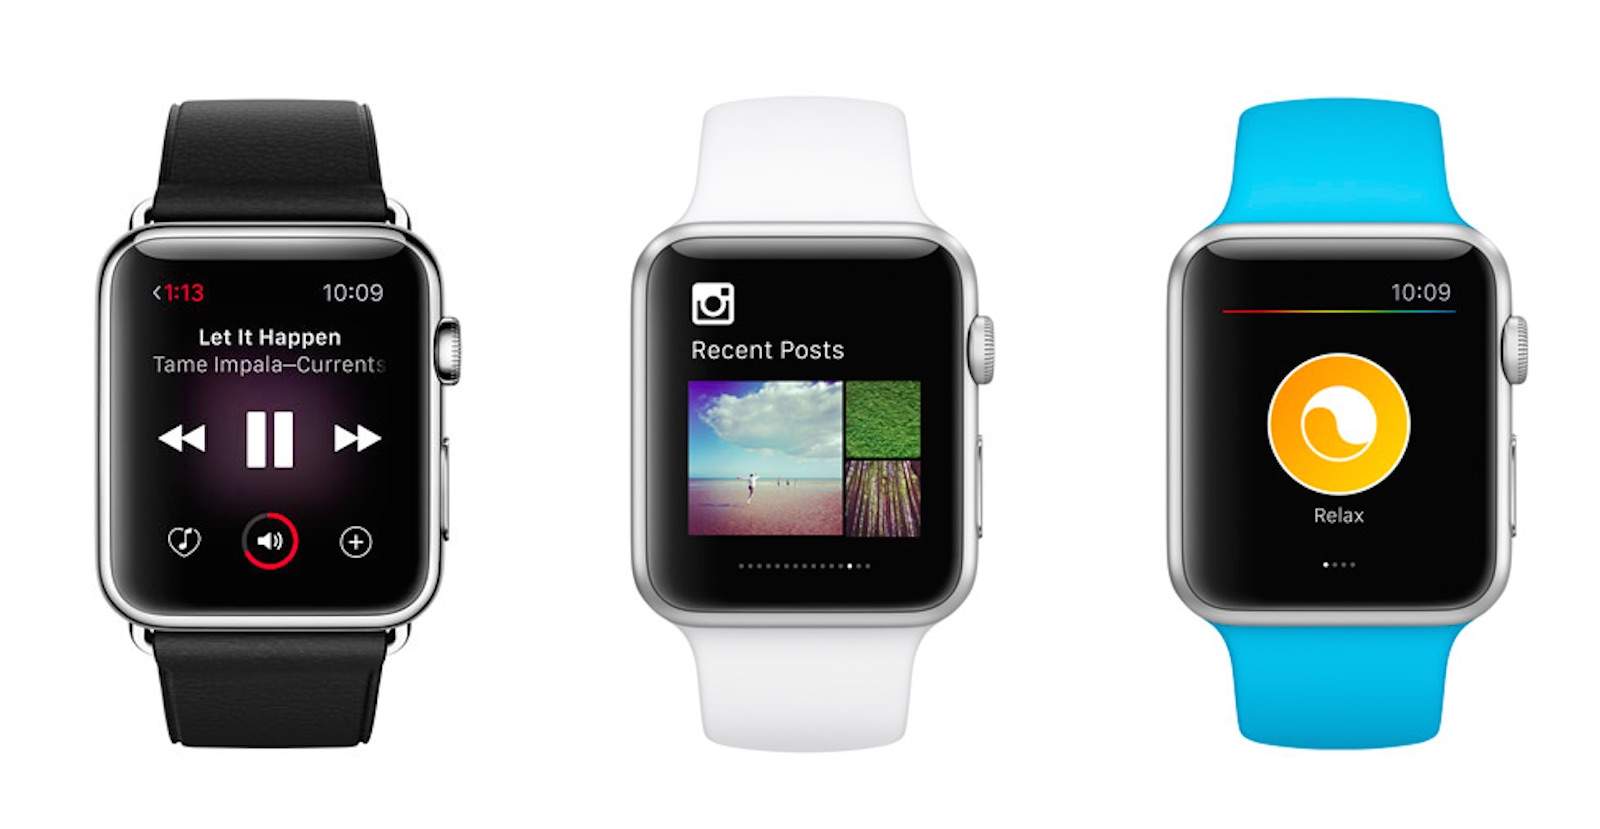 WatchOS 2.0.1 is out.